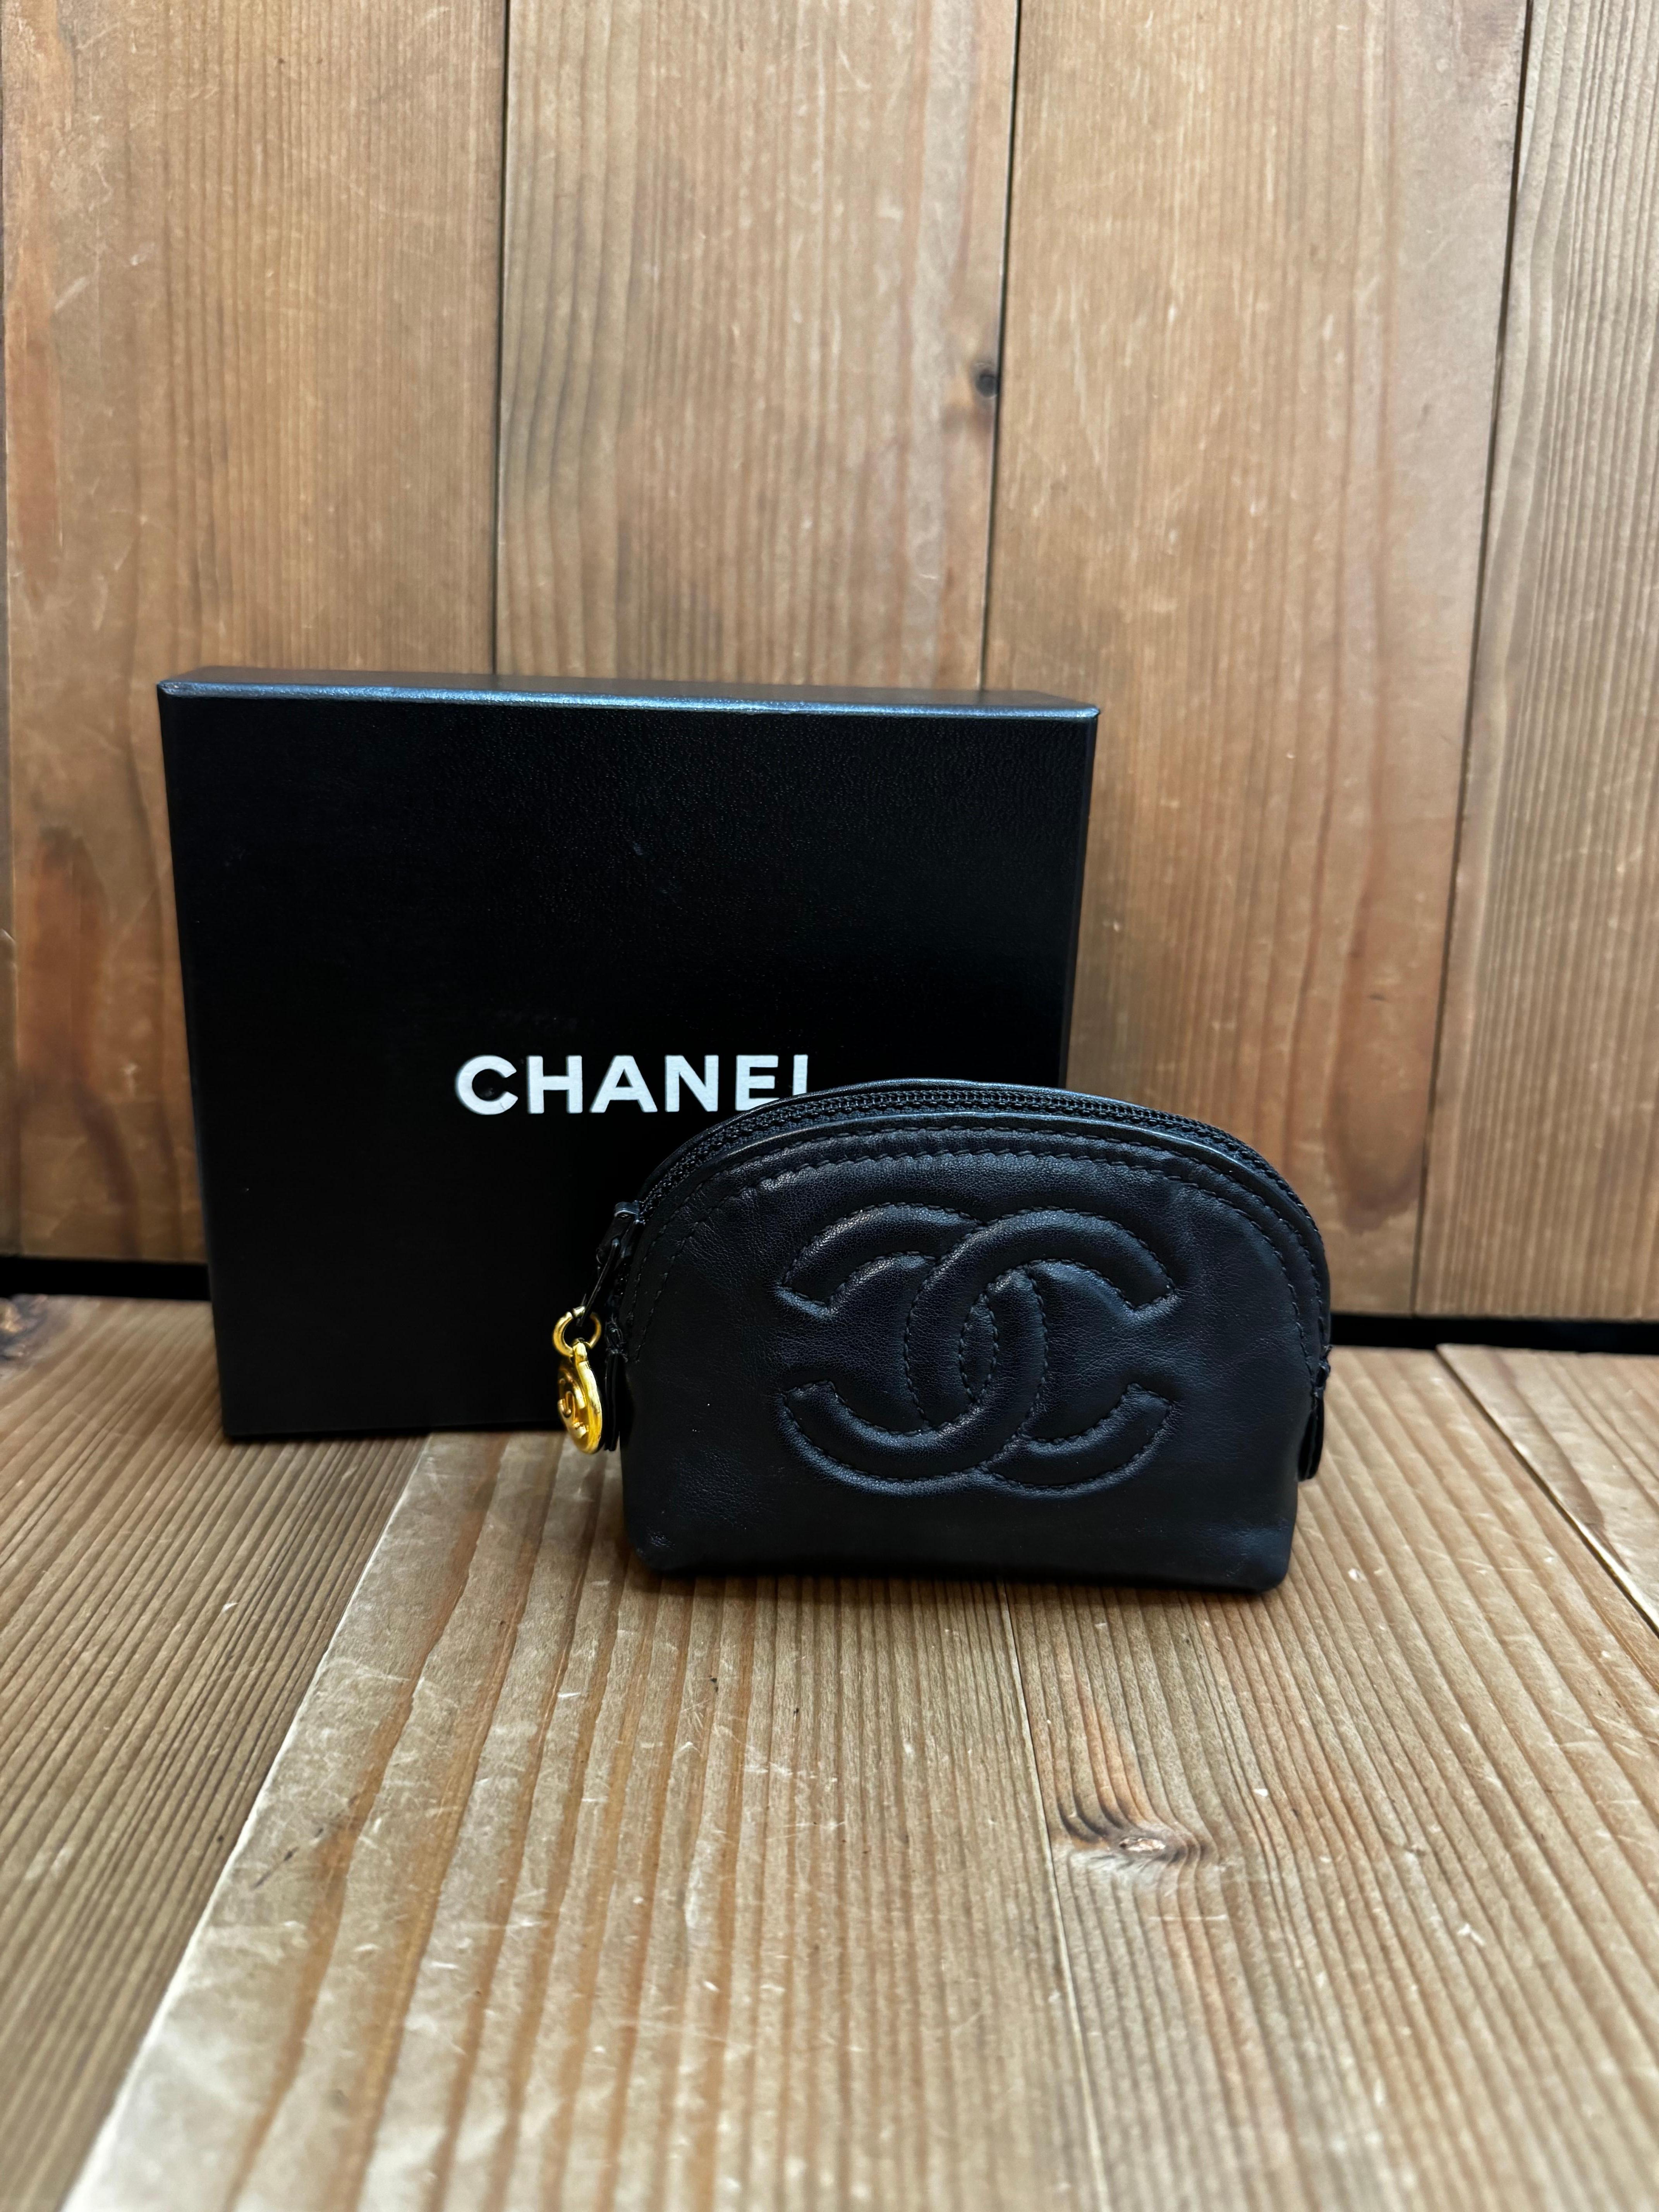 This vintage CHANEL mini pouch bag is crafted of lambskin leather in black featuring gold toned hardware. Top zipper closure opens to a beige lamskin leather interior. Measures approximately 4 x 3 x 1.5 inches. Made in Italy 3xxxxxx holo series.